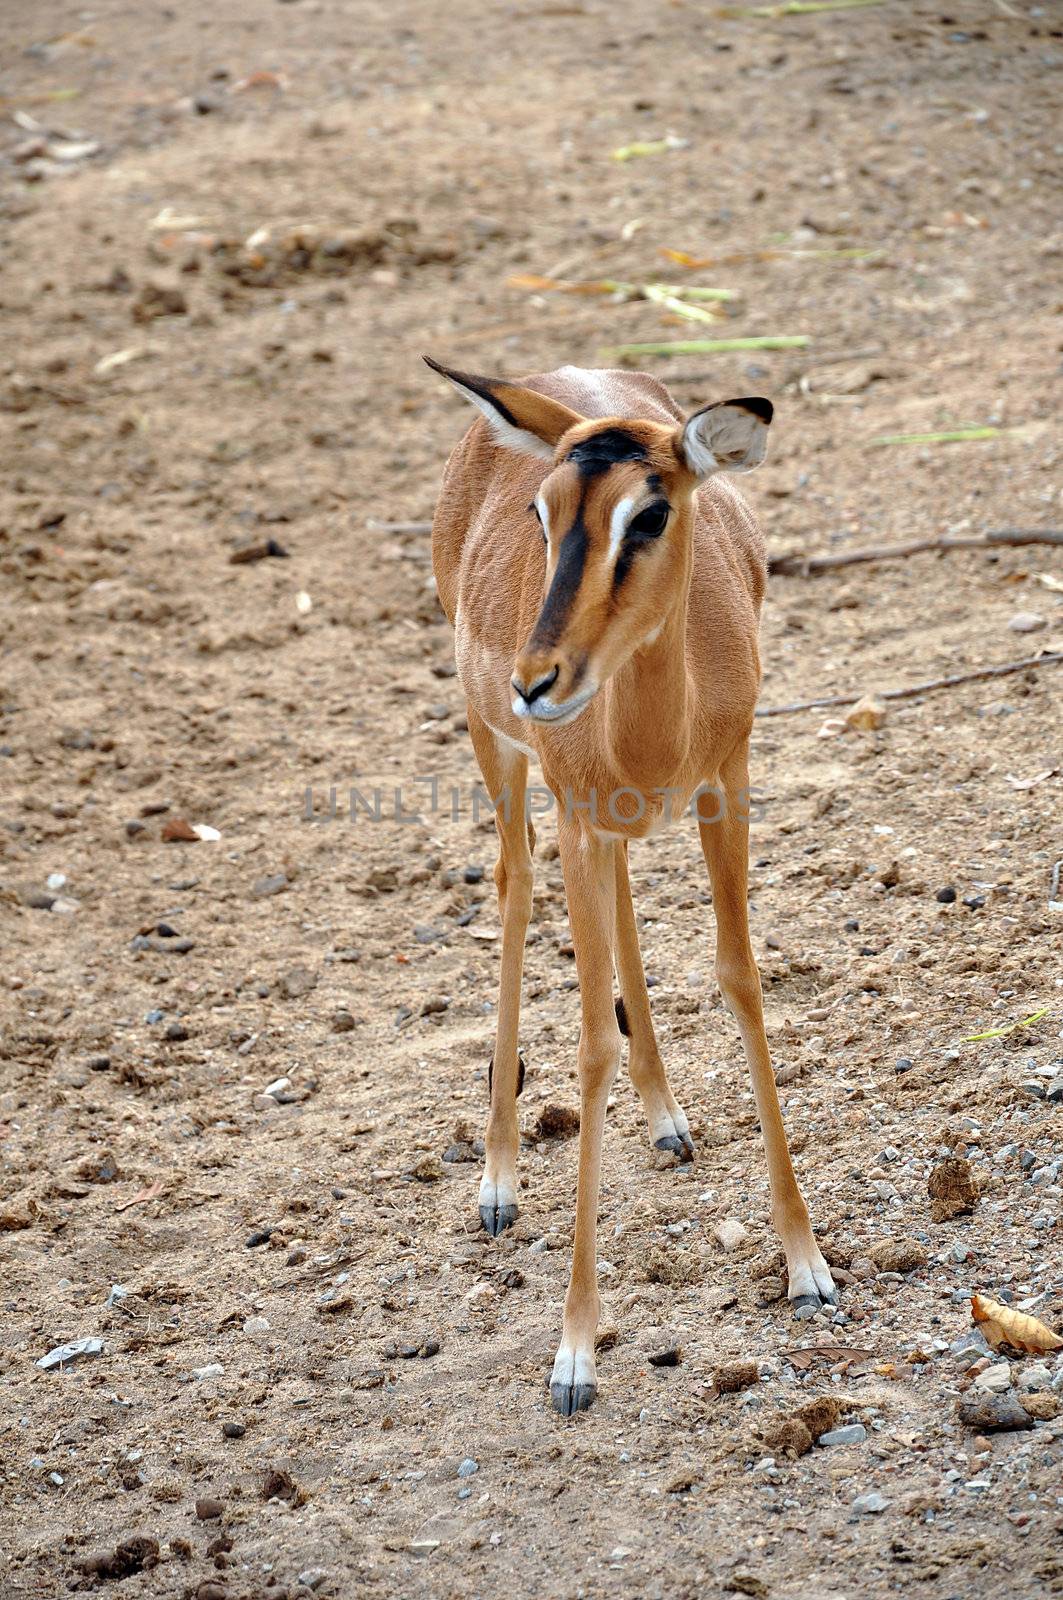 The name impala comes from the Zulu language meaning "gazelle".